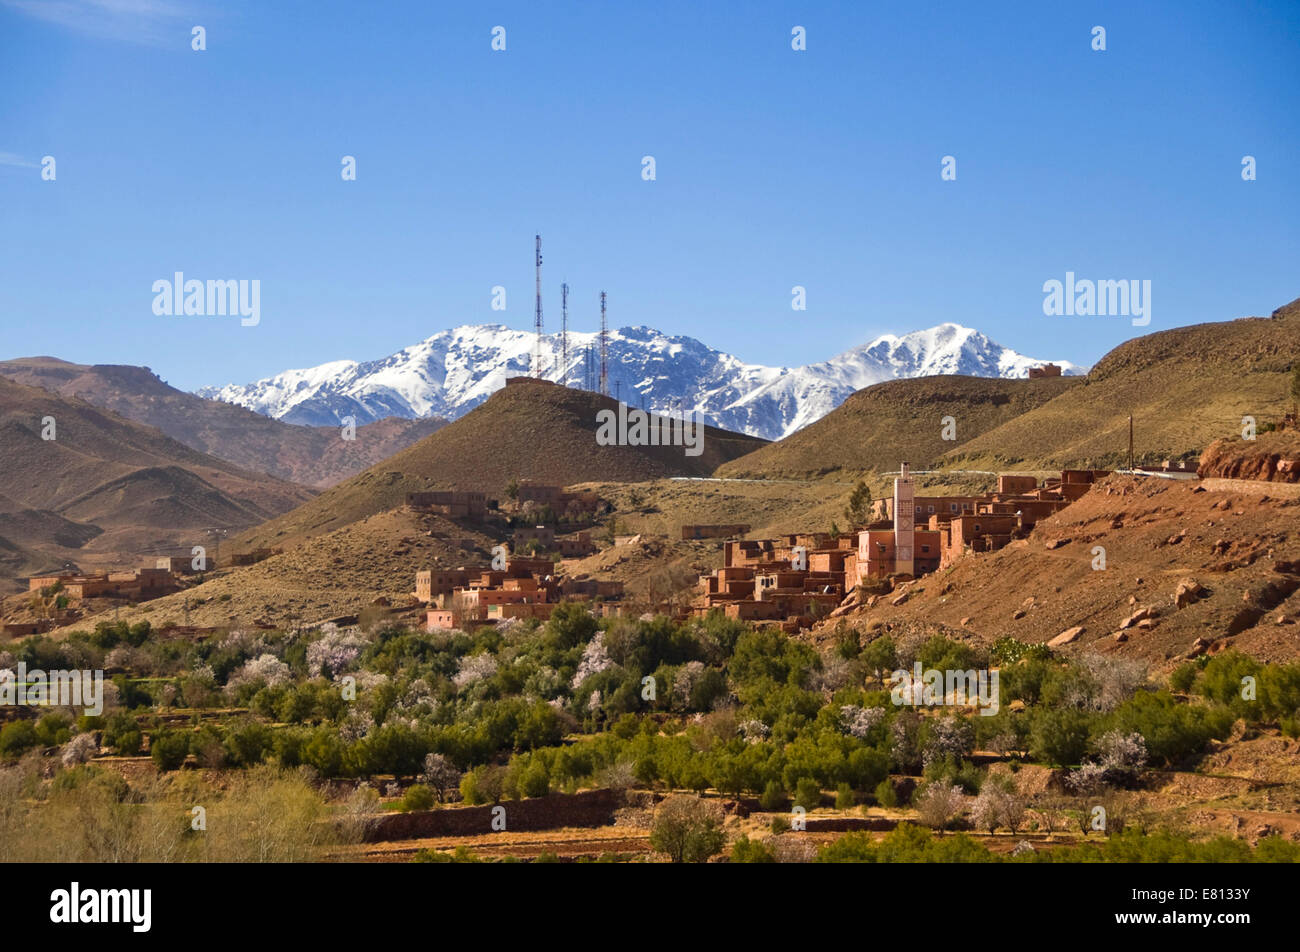 Horizontal view of a small Berber village in the High Atlas Mountain range in Morocco. Stock Photo